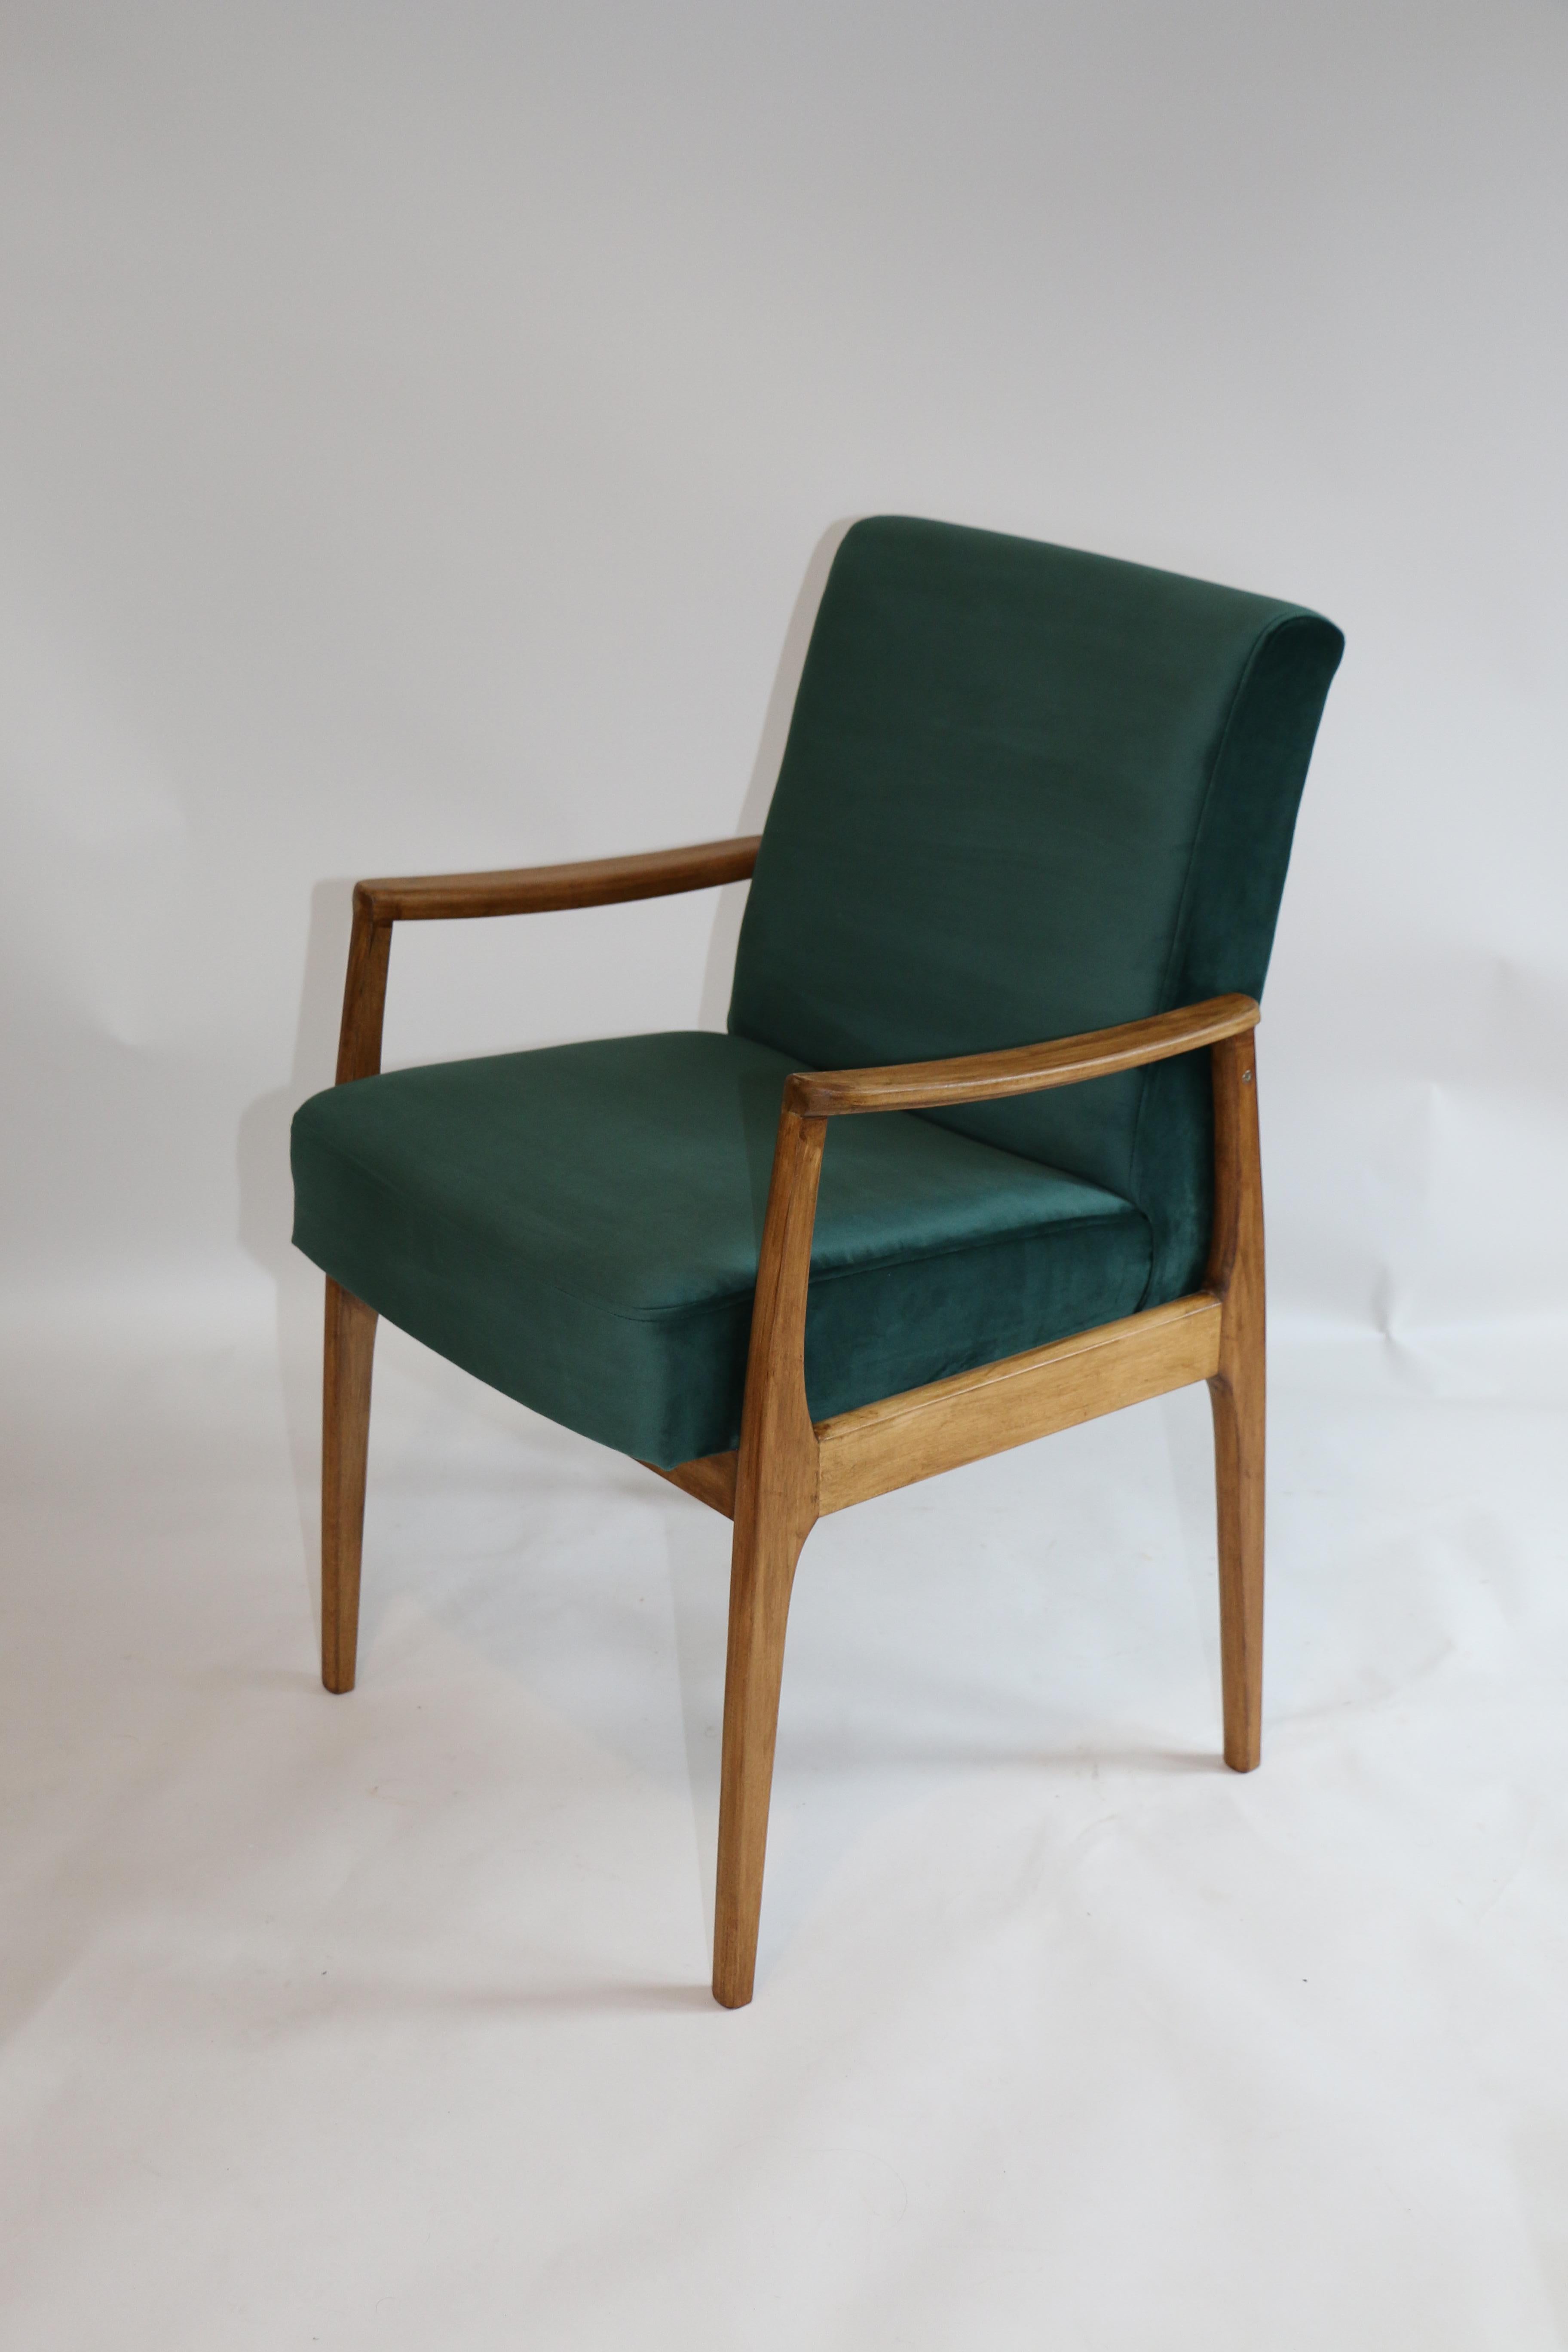 Pair of chairs in green velvet from 1980s, new upholstery covered with velvet fabric in fashionable green color, finished with wooden chair cushion. Wooden elements in natural oak color. Perfect condition.

Dimension: H 88 x W 60 x D 55.